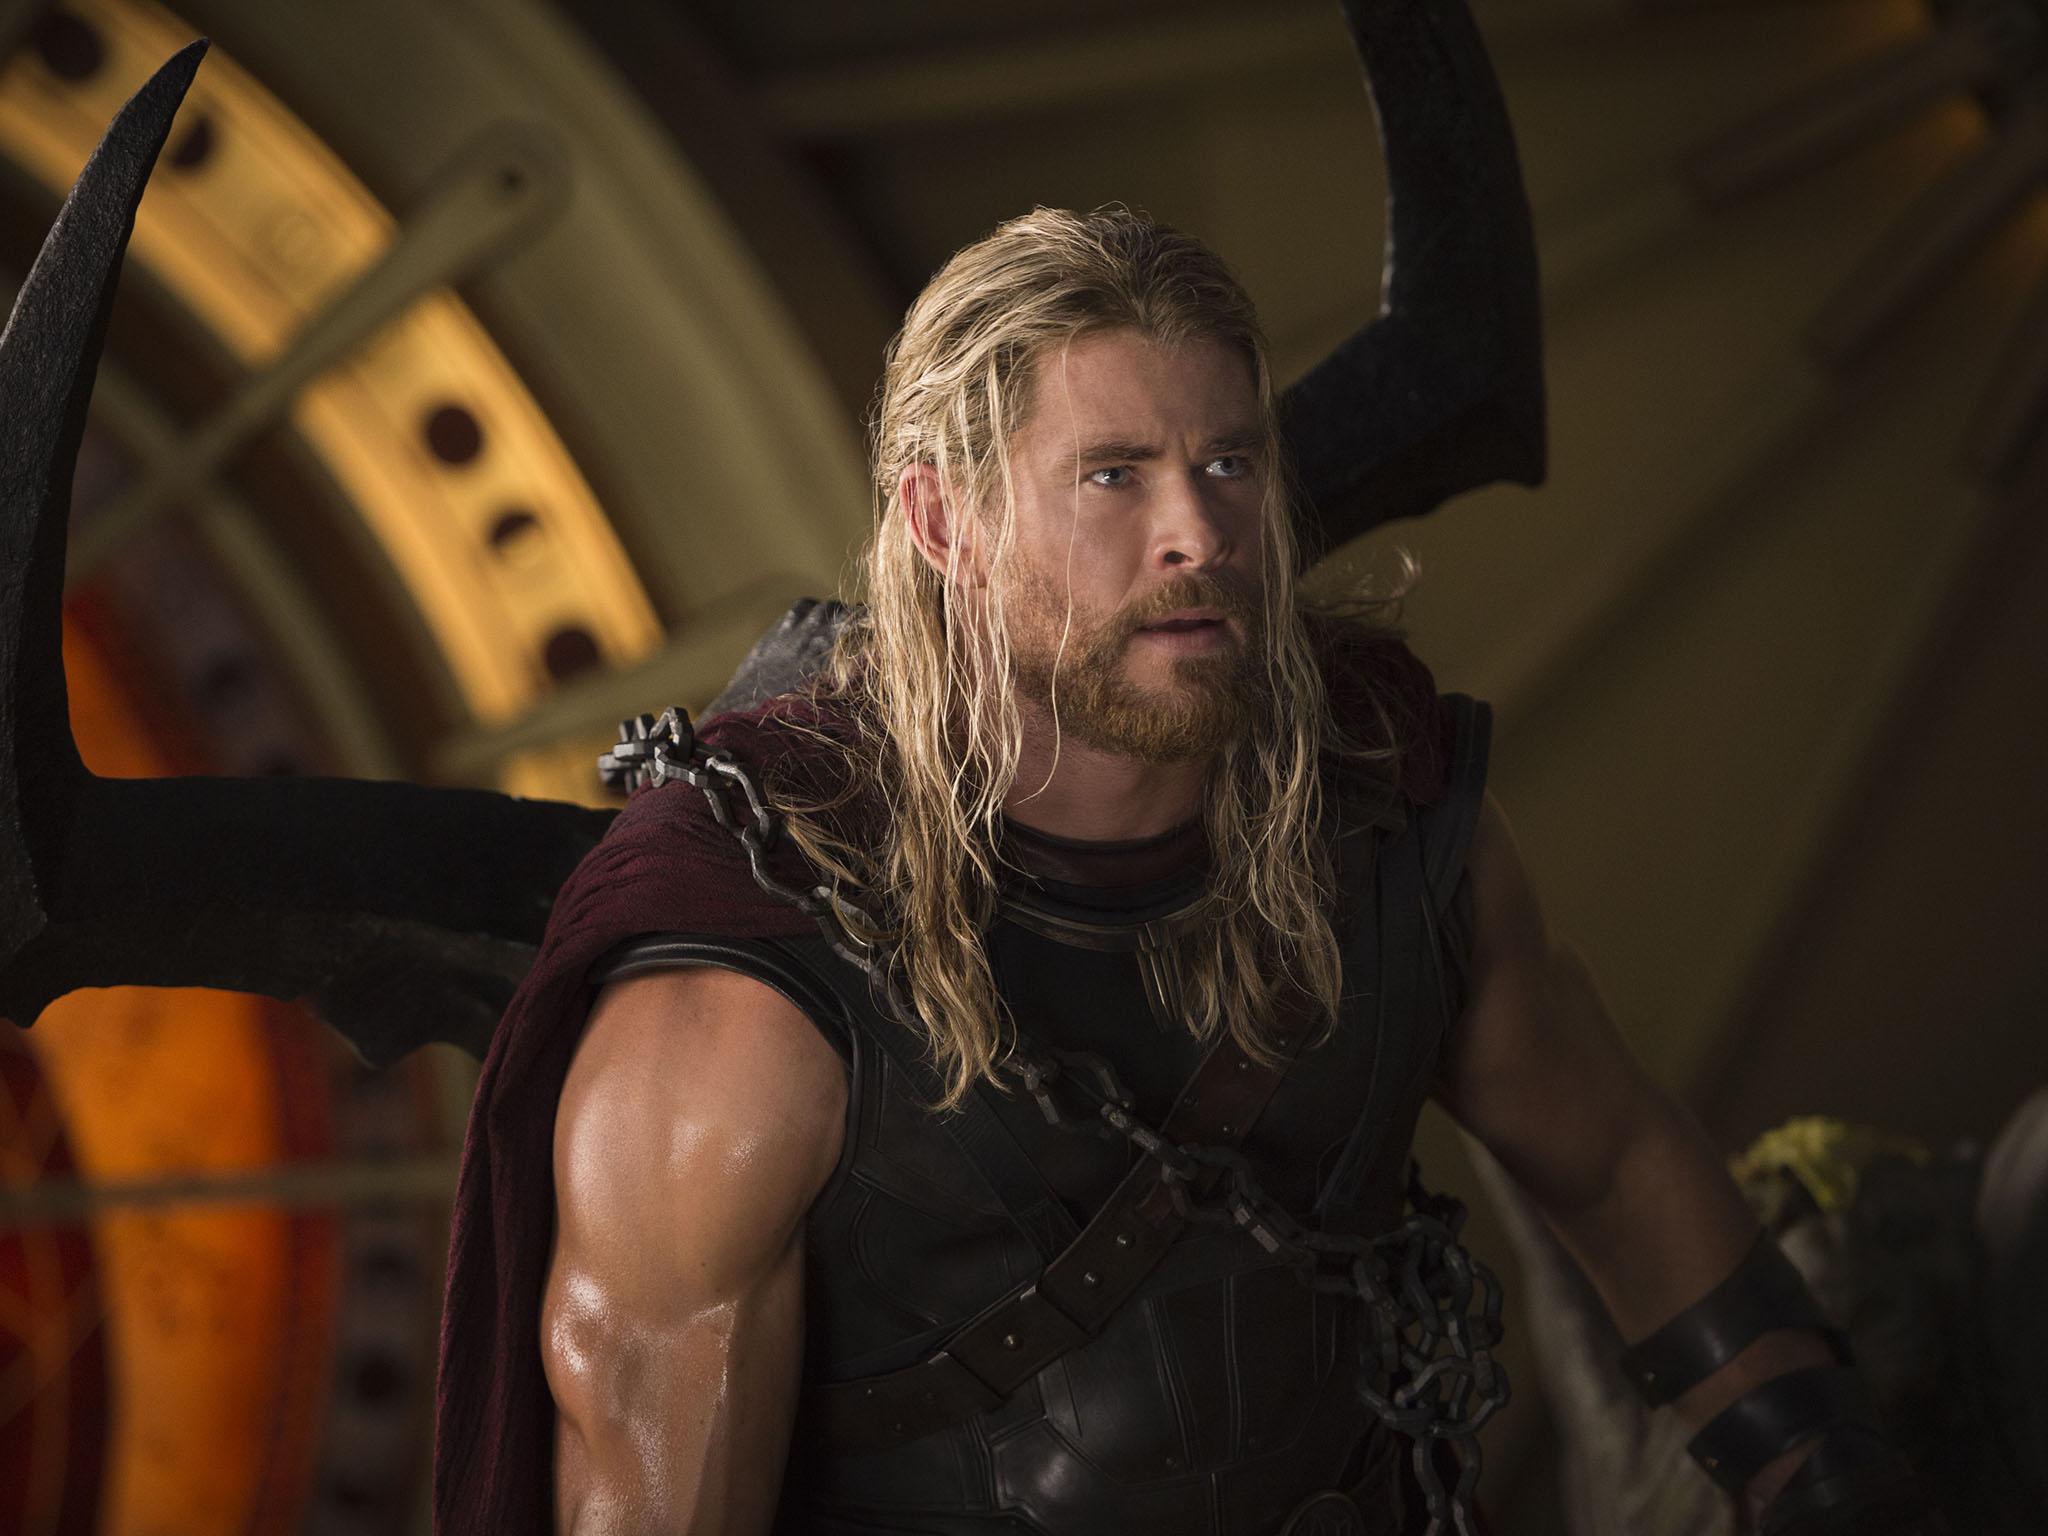 The actor as Thor in the 2011 American superhero film based on the Marvel comics character of the same name (Rex)